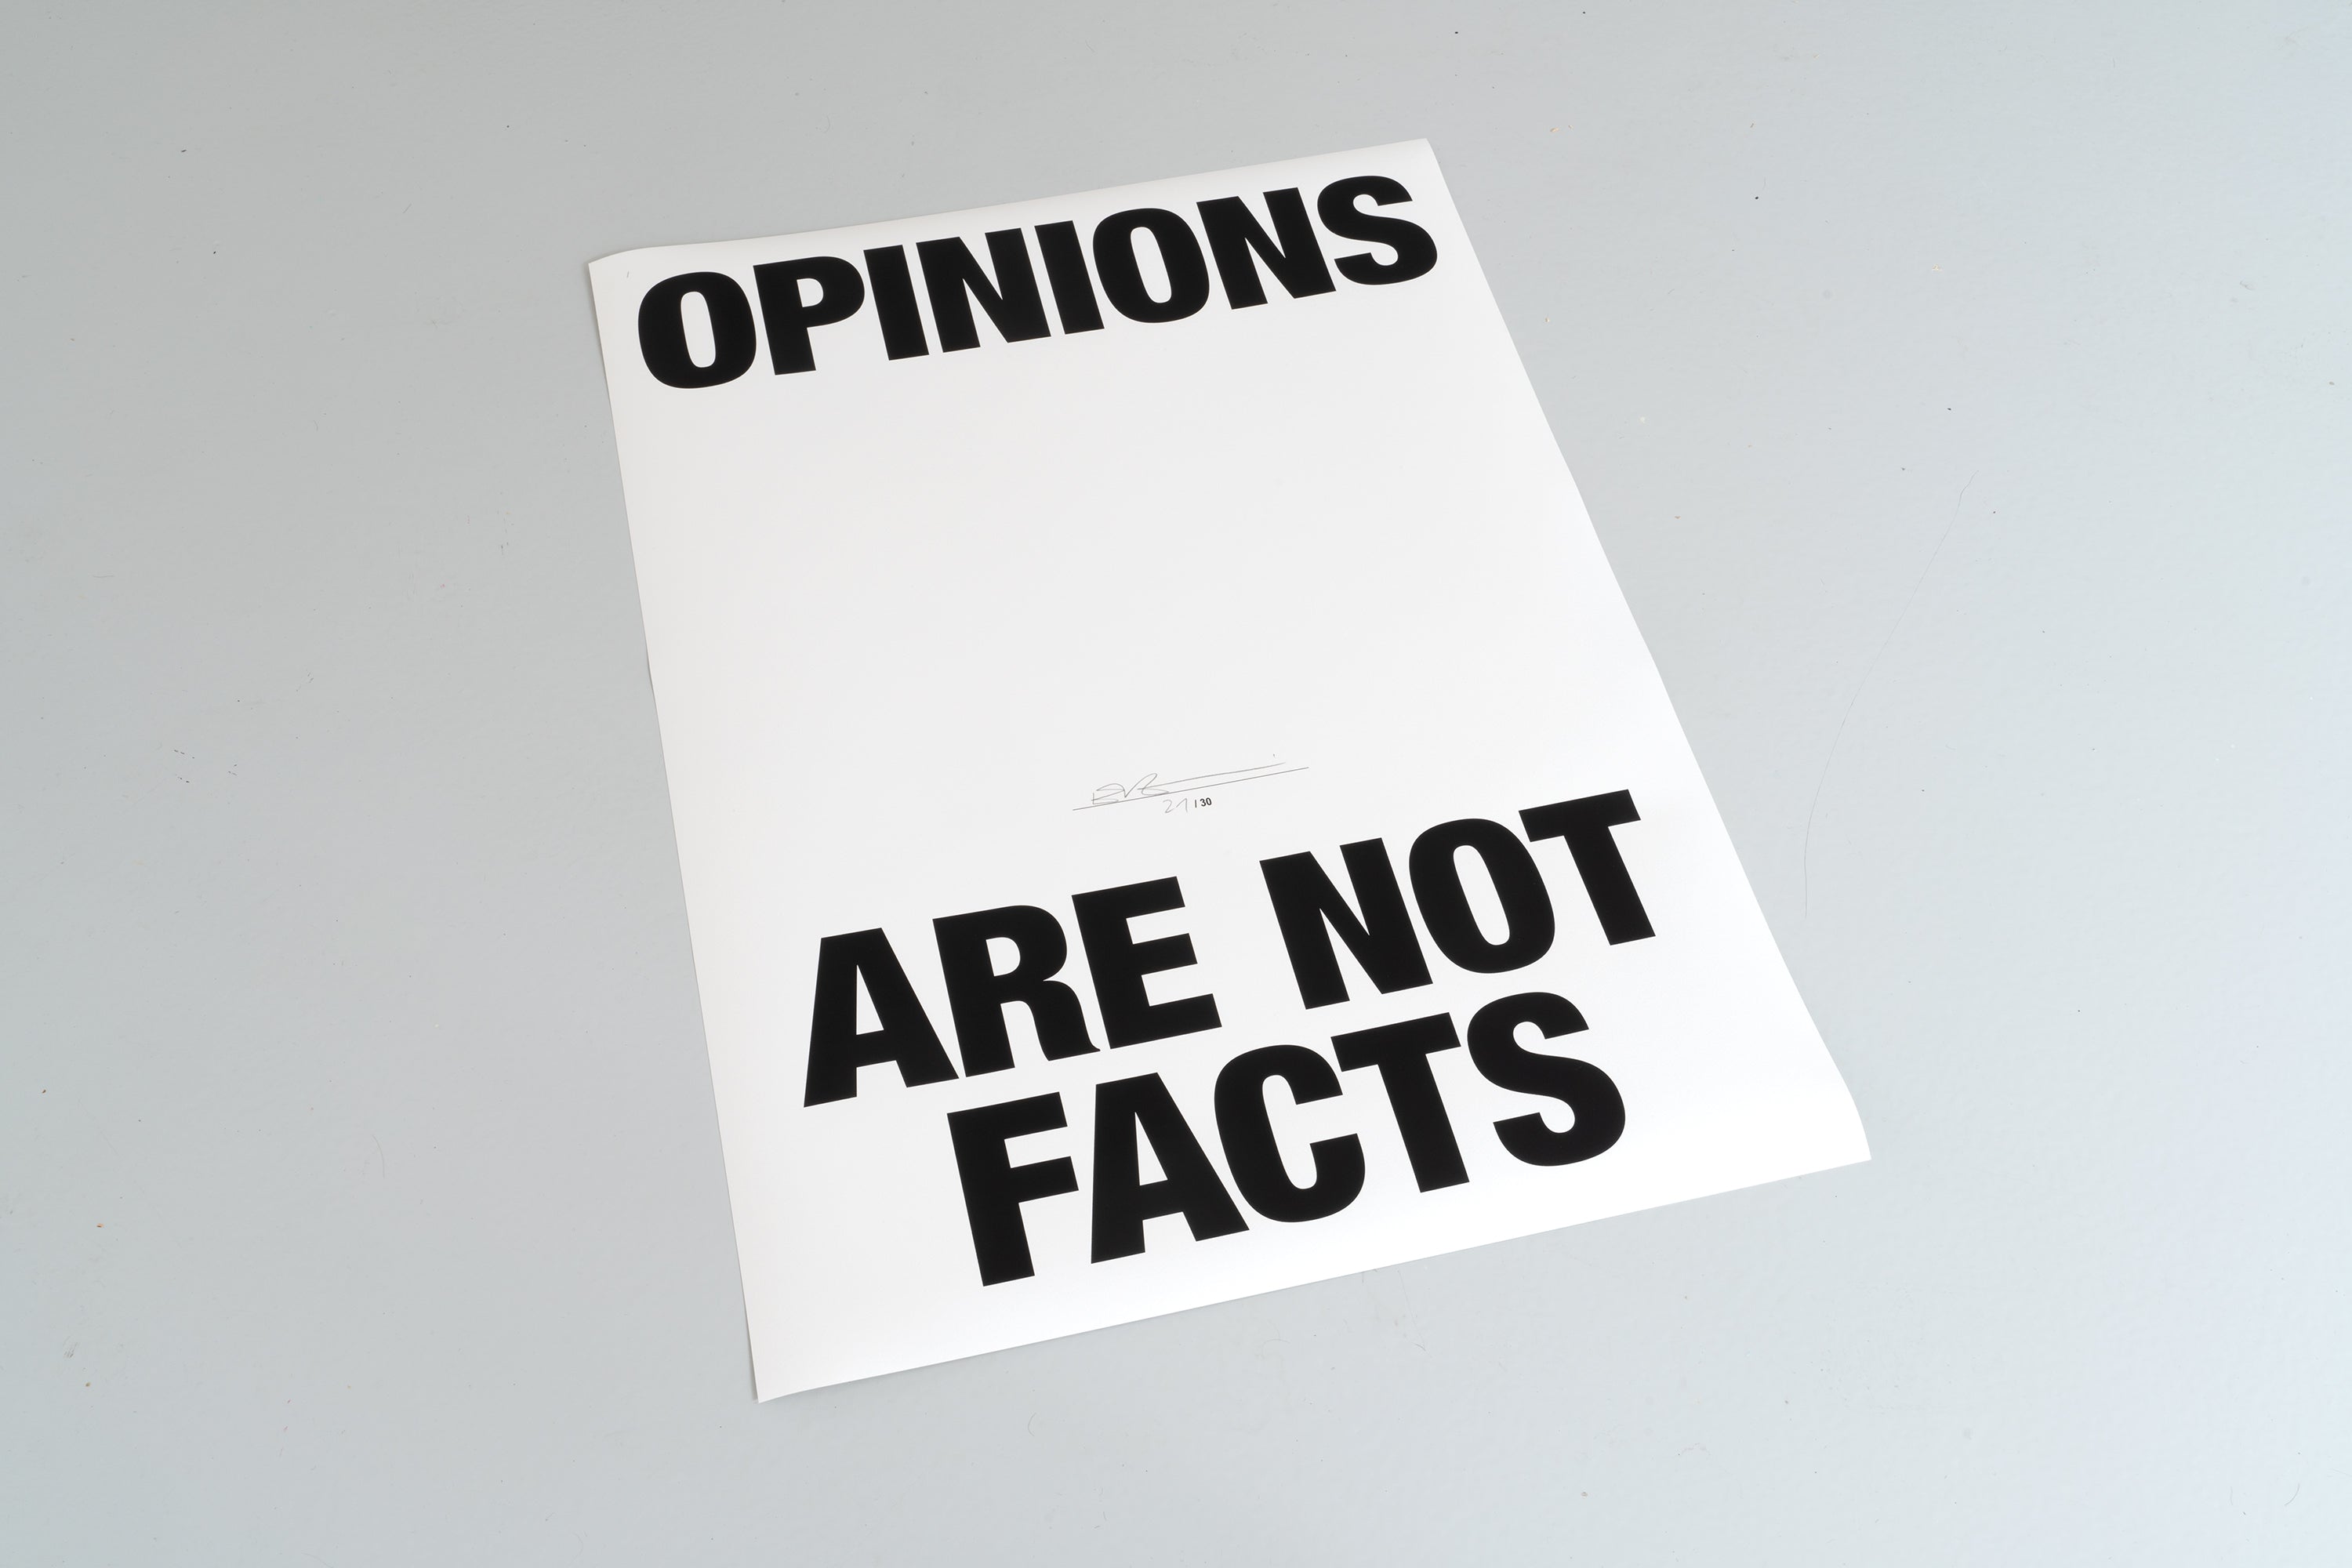 OPINIONS ARE NOT FACTS